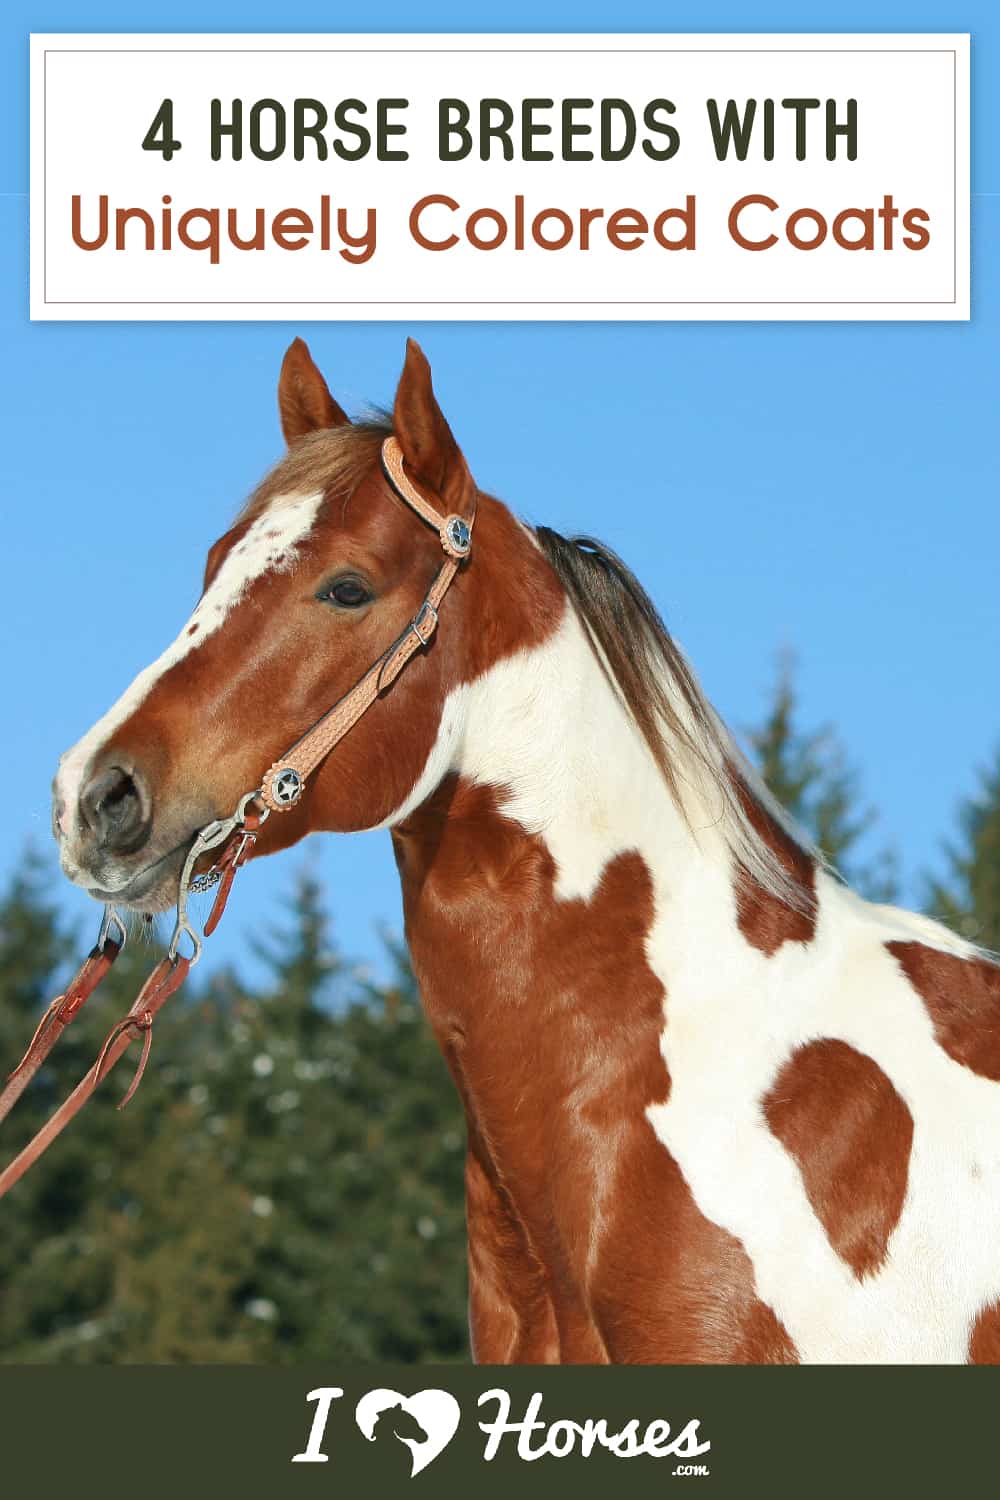 4 Horse Breeds With Uniquely Colored Coats